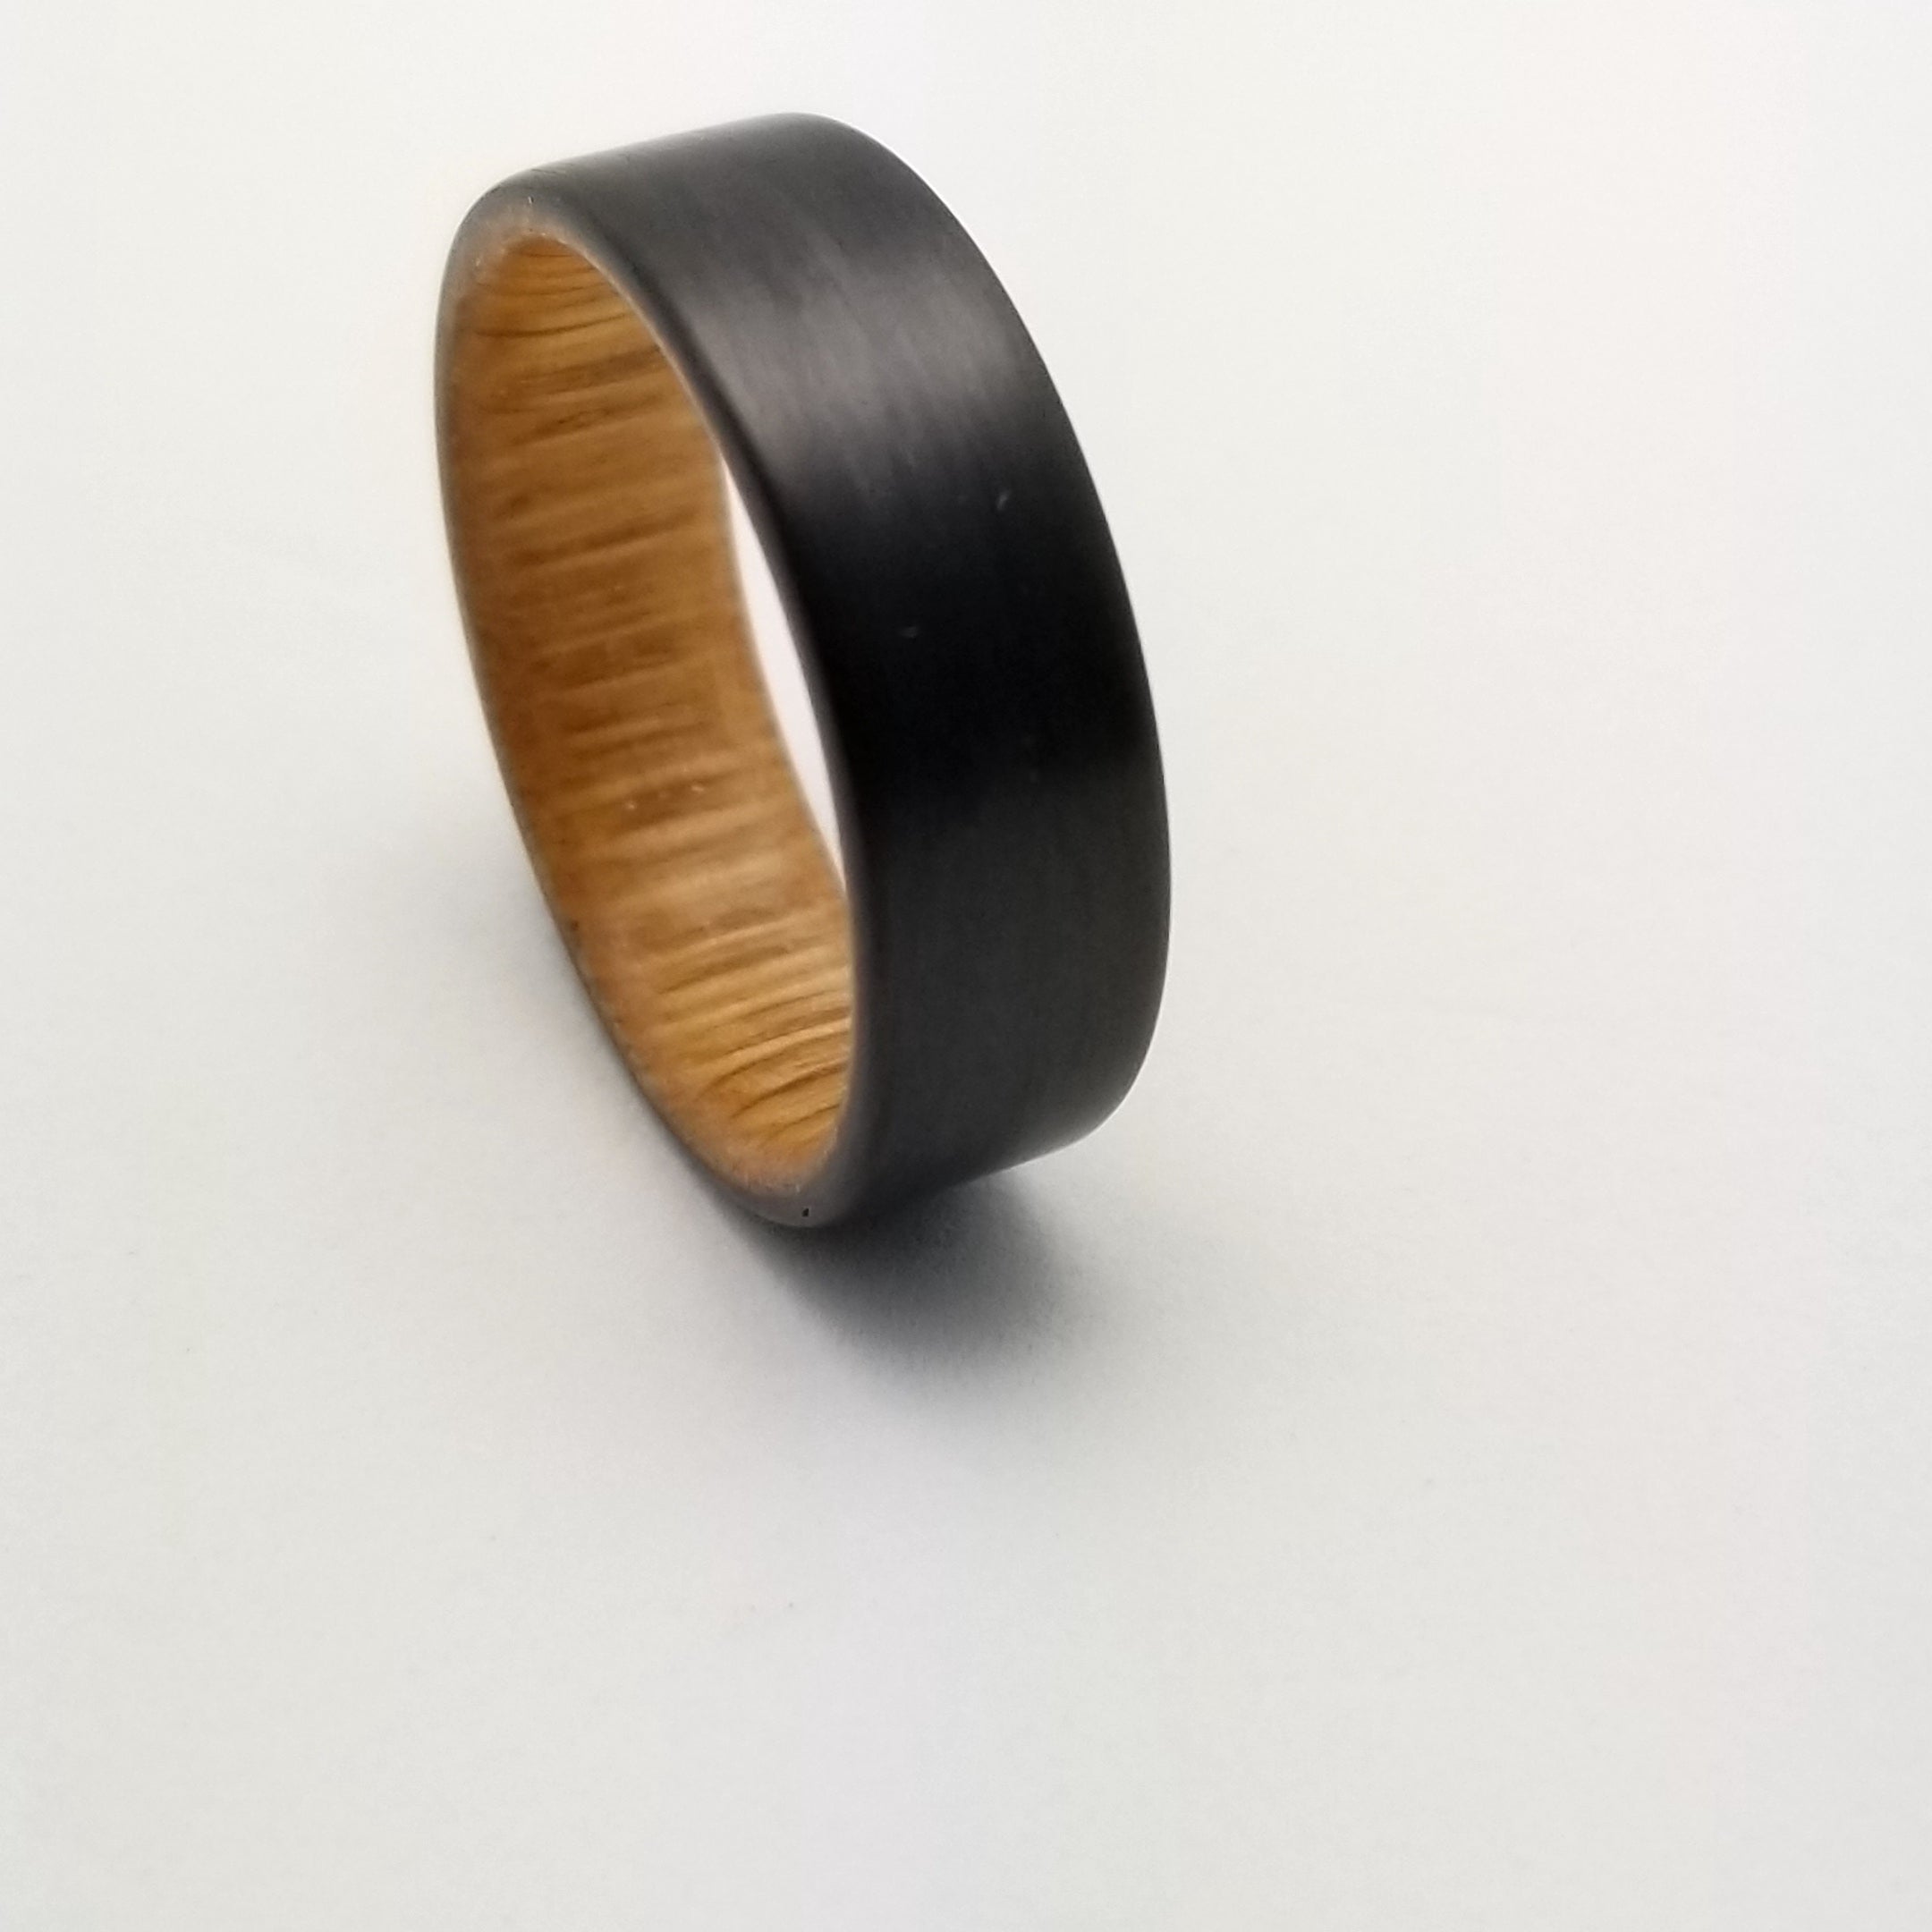 Carbon fiber and Reclaimed Barn Wood Wedding Ring